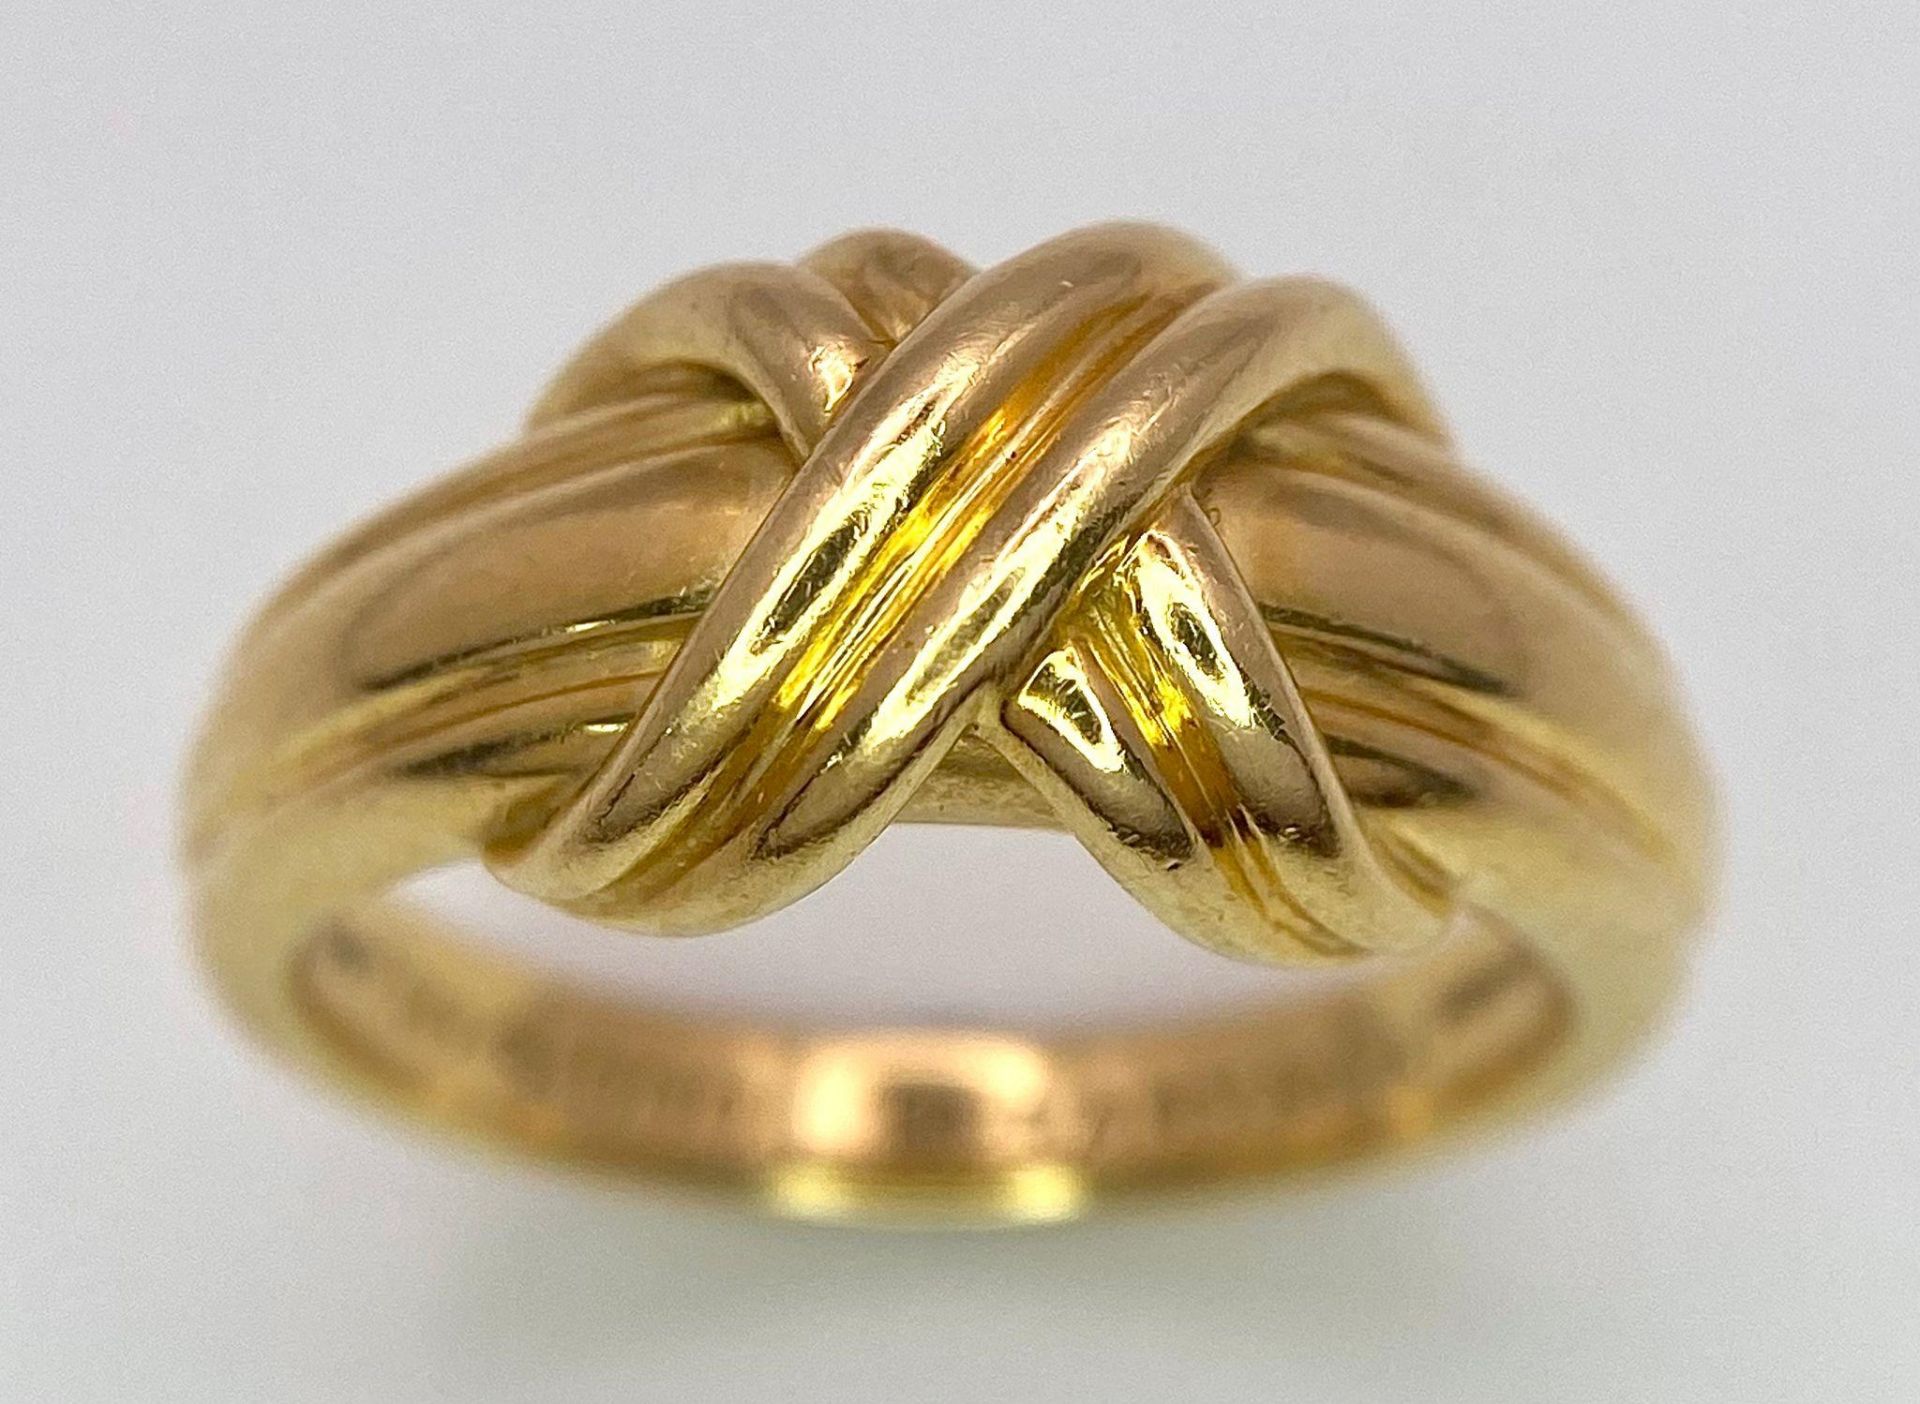 A Beautiful Tiffany and Co. 18K Gold Love Ring. Tiffany and co. markings. Size N. 7.2g weight. - Image 2 of 10